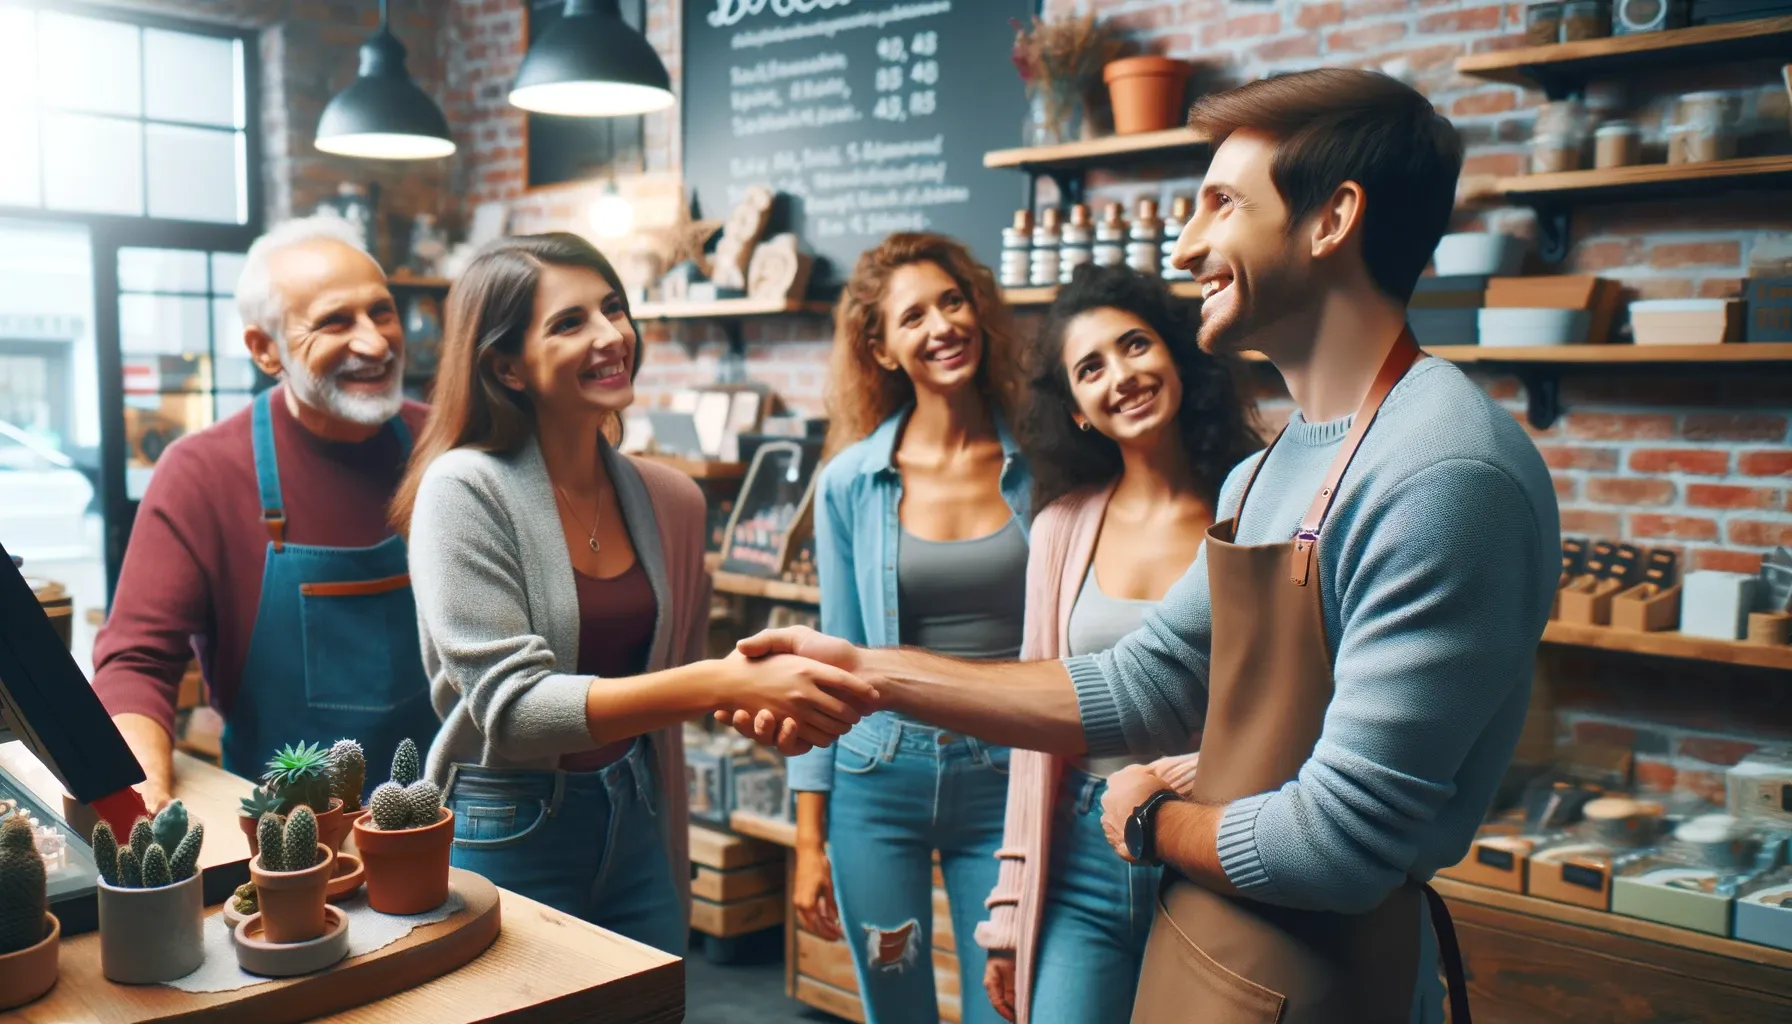 Benefits of Local Marketing for Brick and Mortar Stores